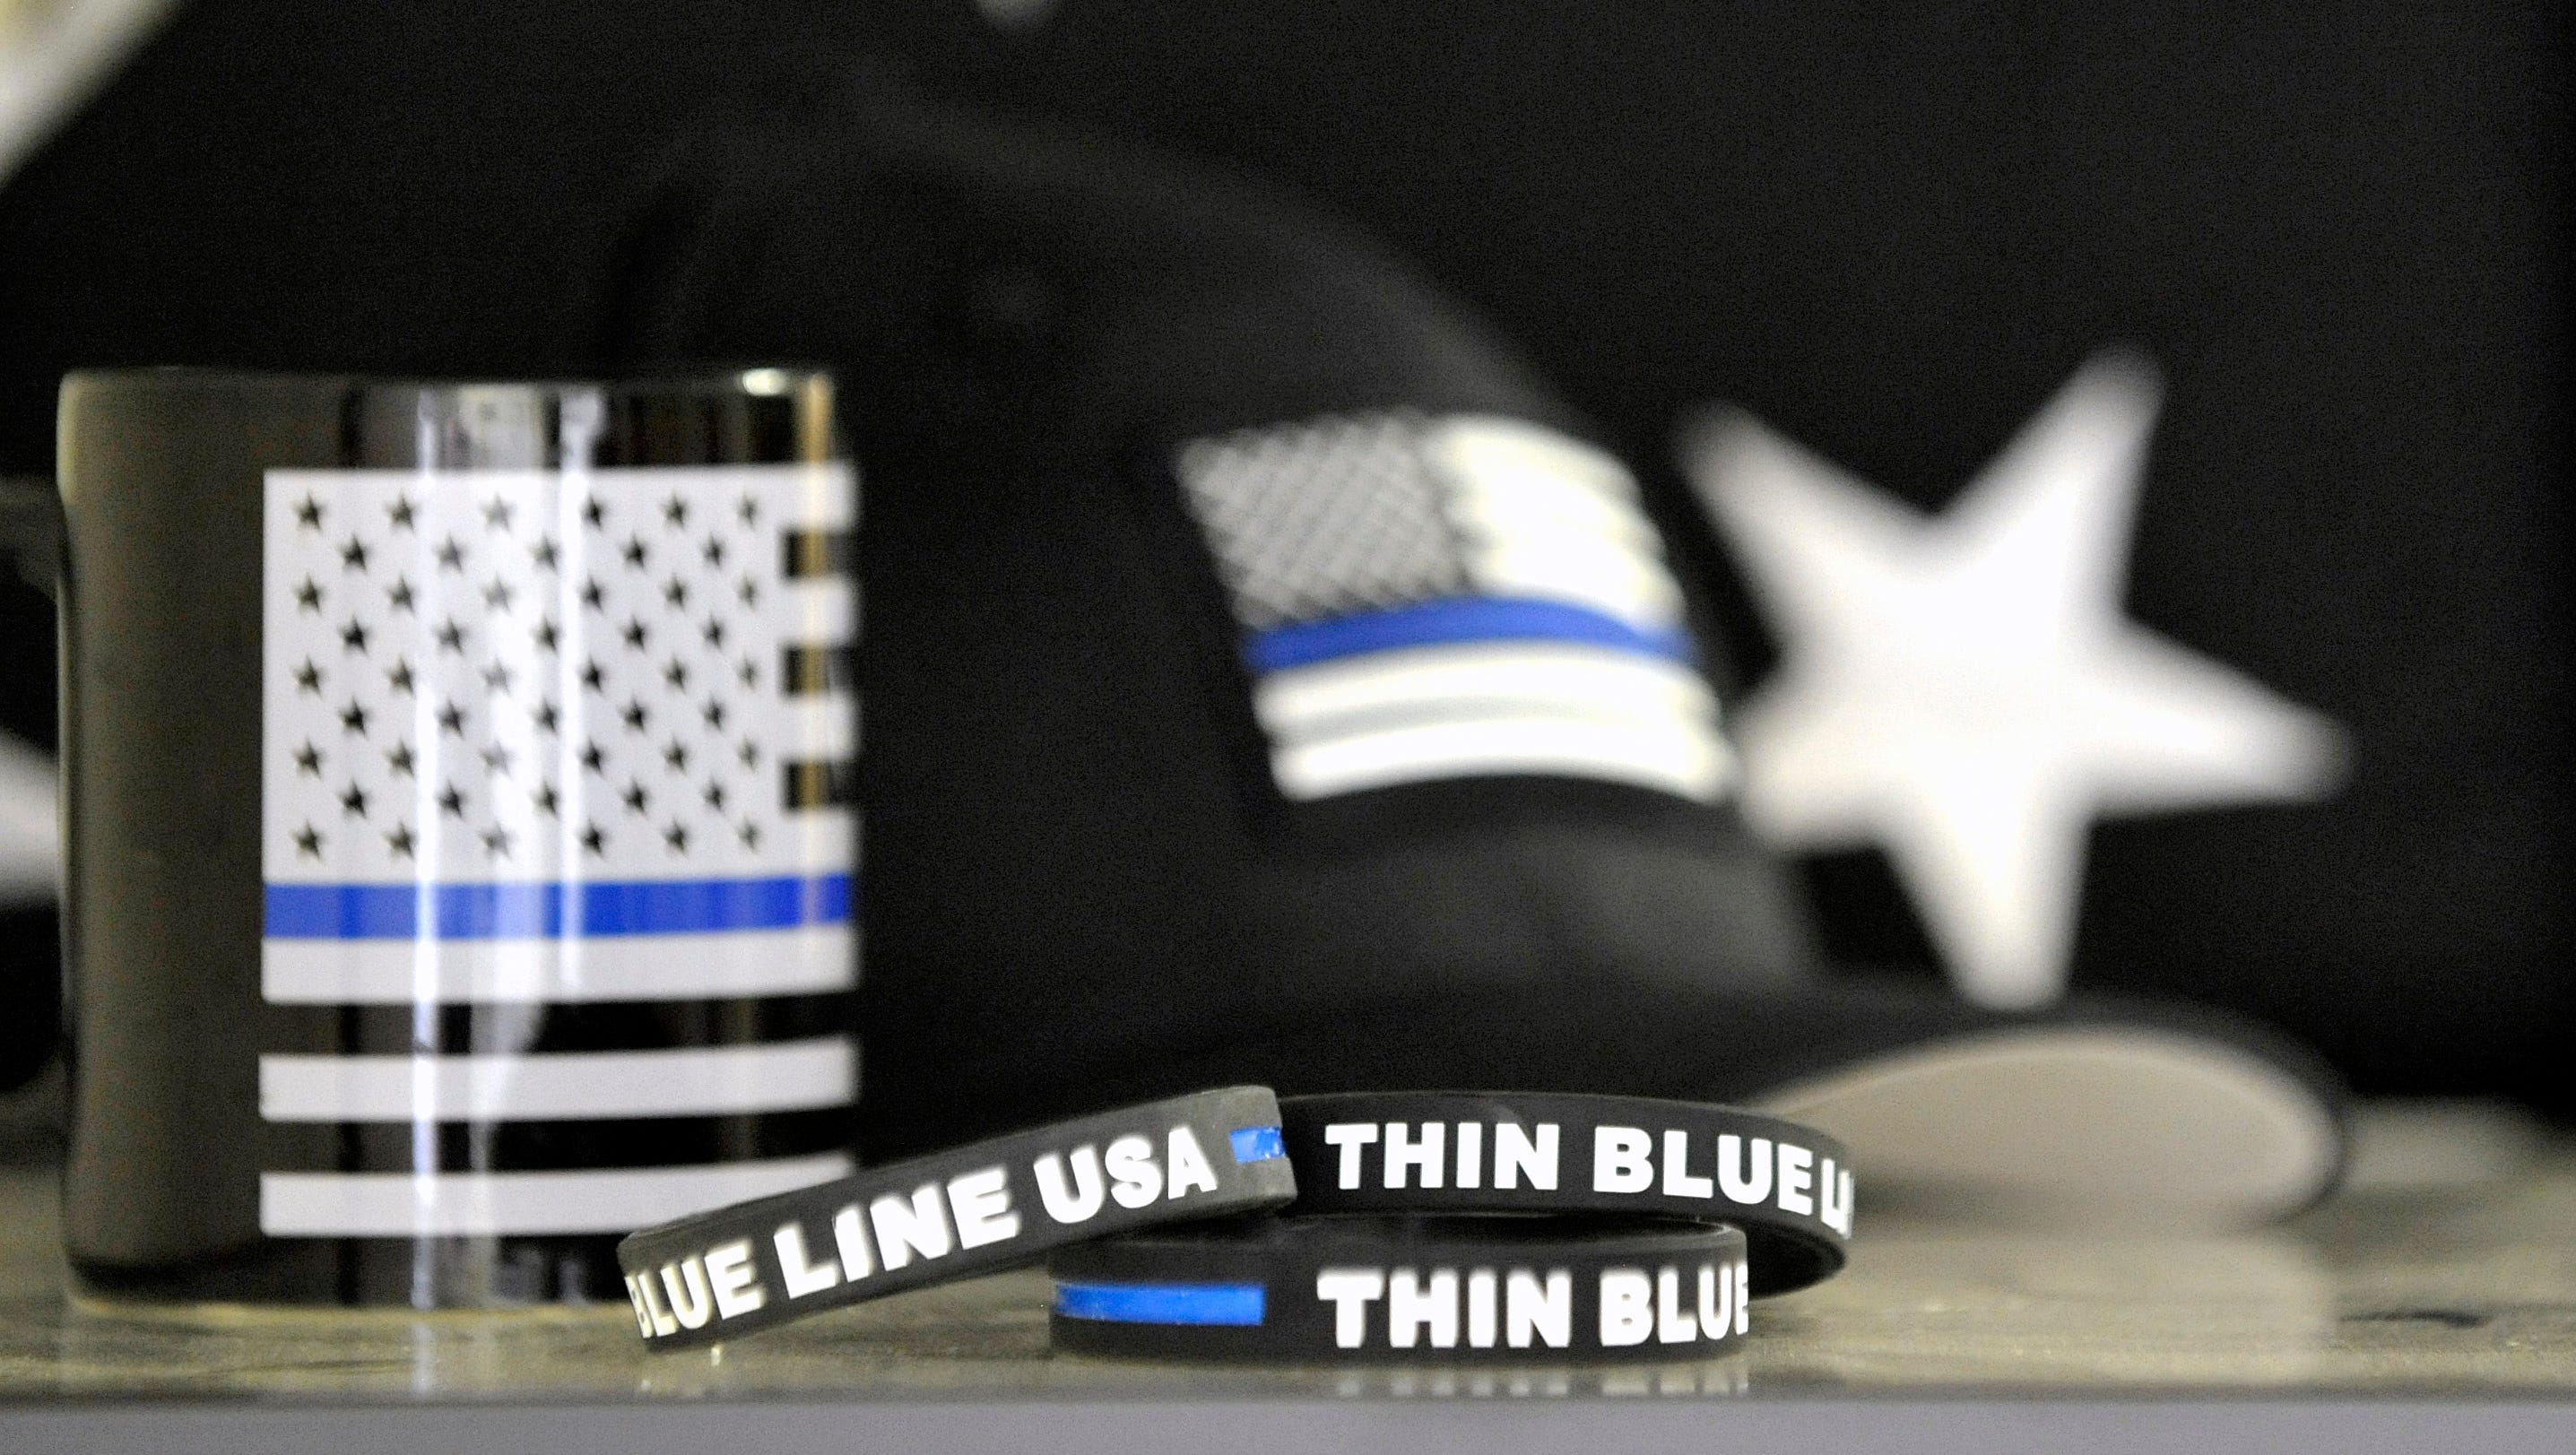 TBL USA products include coffee mugs, hats, flags and wrist bands.